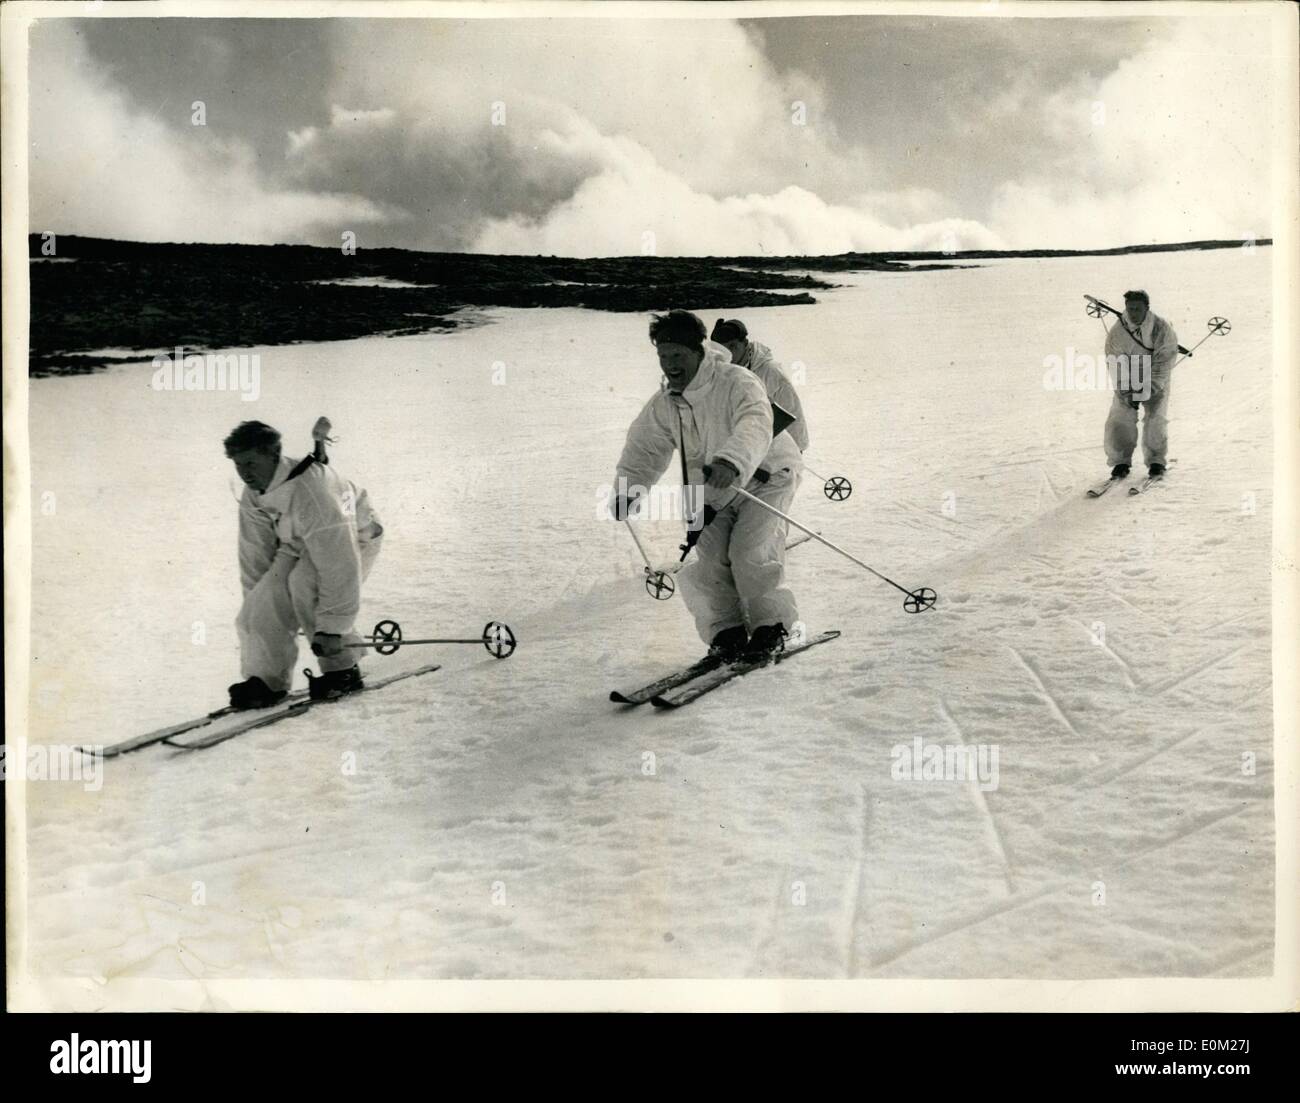 Mar. 03, 1953 - Marine Commando Winter Warfare Training Course. In The Cairngorm Mountains Of Scotland: The bitterly cold summit of the Cairngorm Mountains - of Scotland is the setting for a training course in Winter Warfare - for a  of Commandoes of the Royal Marines. Photo shows A ski patrol - complete with snow suits - sets off on an exercise over the Cairngorm plateau led by Army Ski Champion Colour Sgt. Broadman (centre) Stock Photo